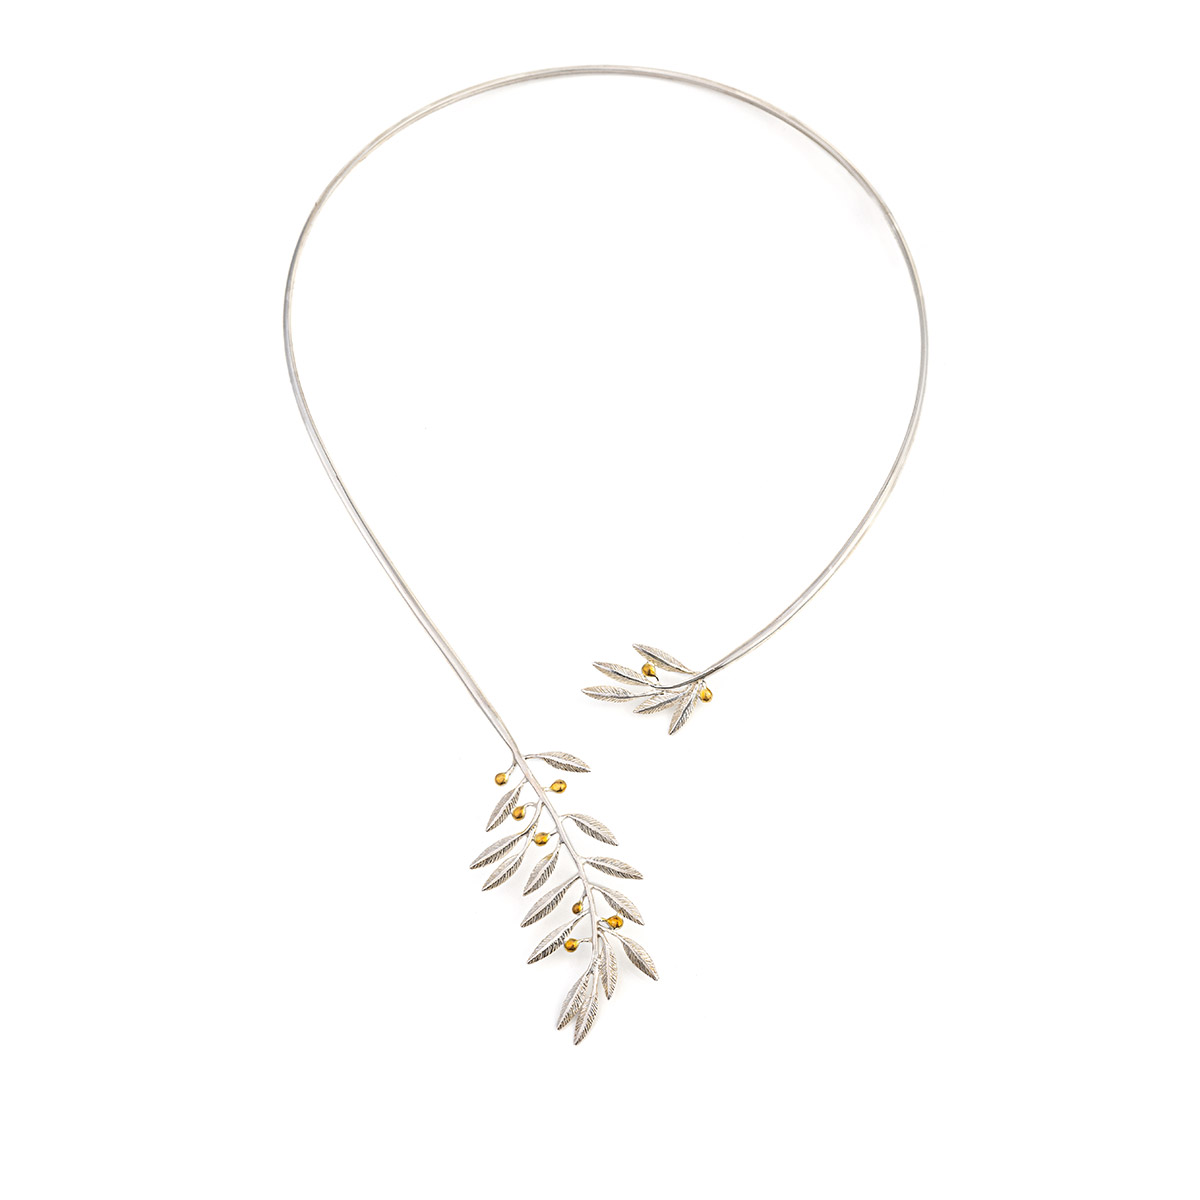 Olive Leaf Lace Necklace - Sterling Silver Gold Plated - GREEK ROOTS